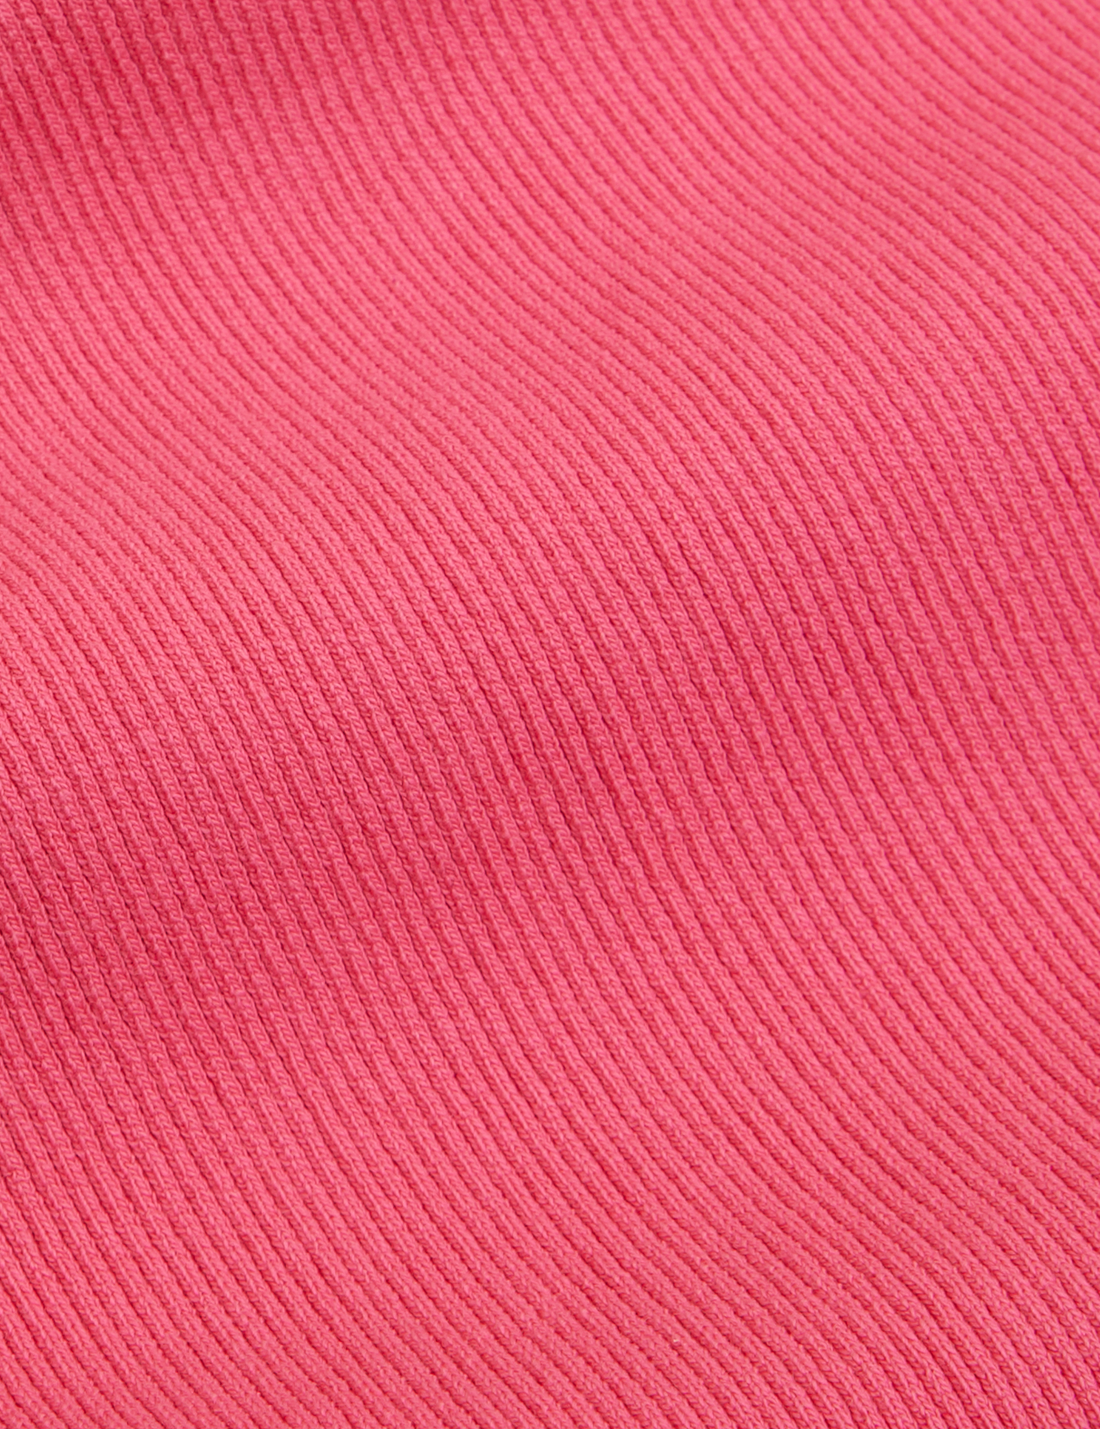 Sleeveless Essential Turtleneck in Hot Pink front detail close up